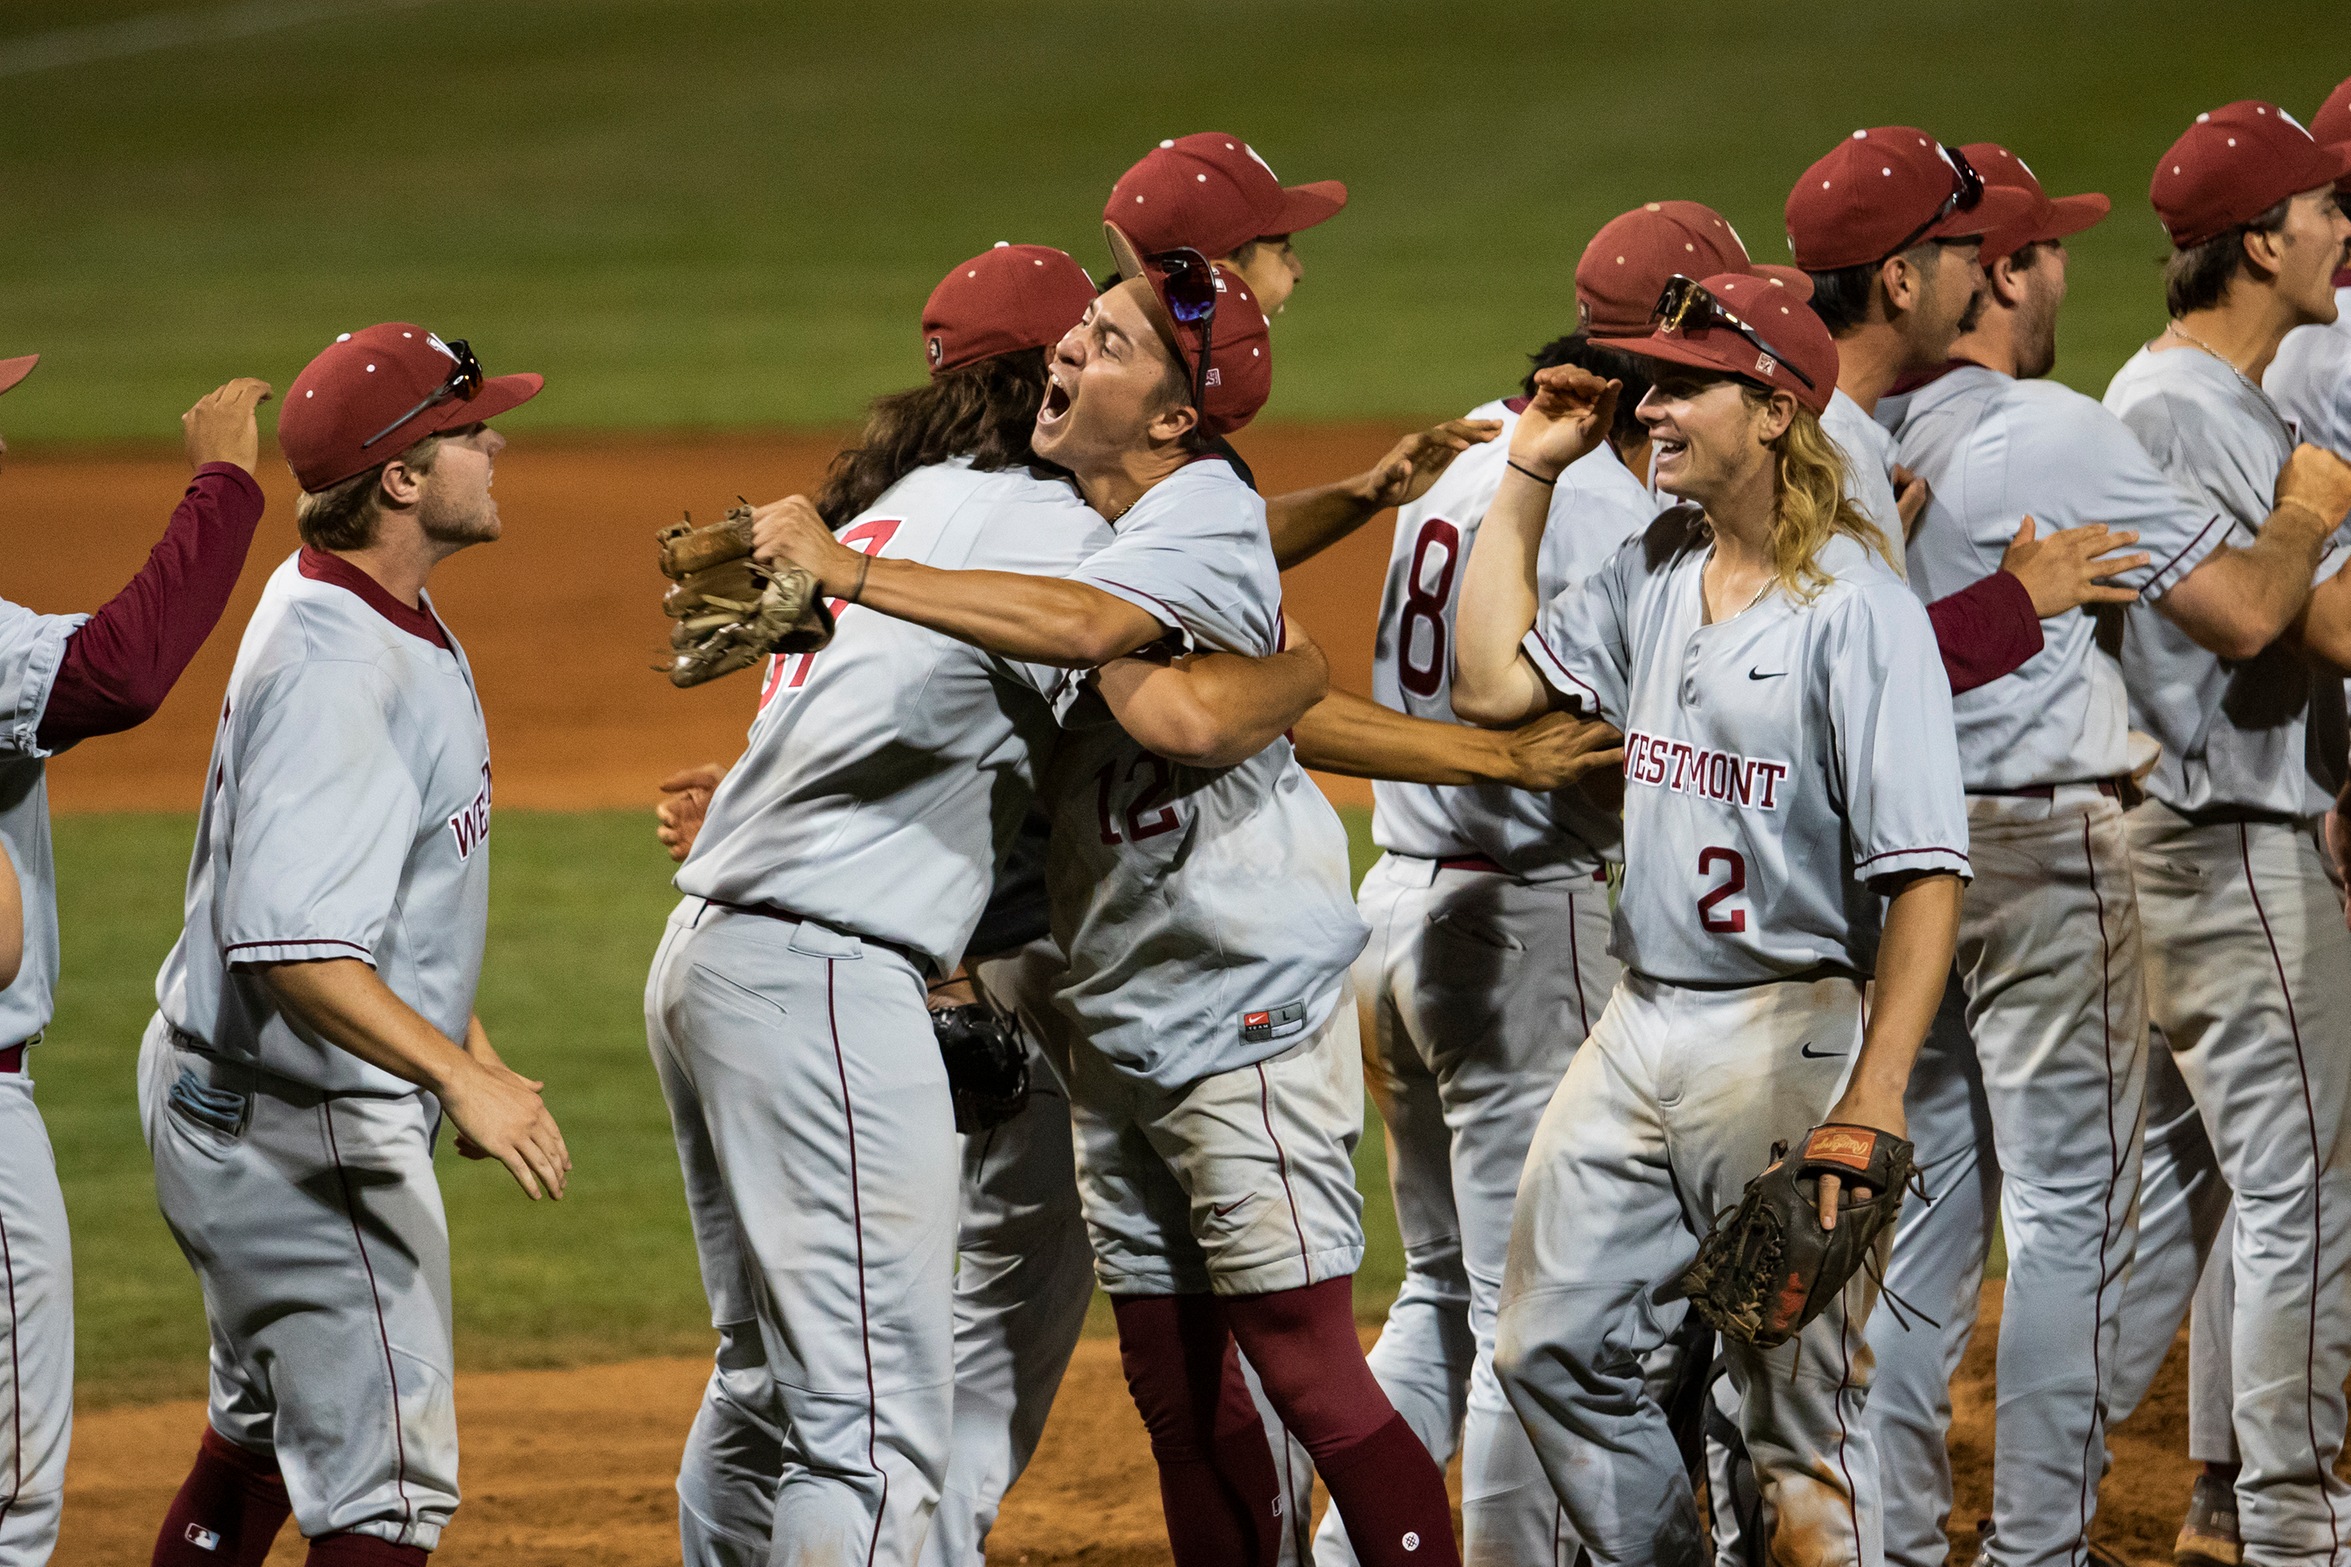 Westmont to Play for First Baseball Championship in Program History